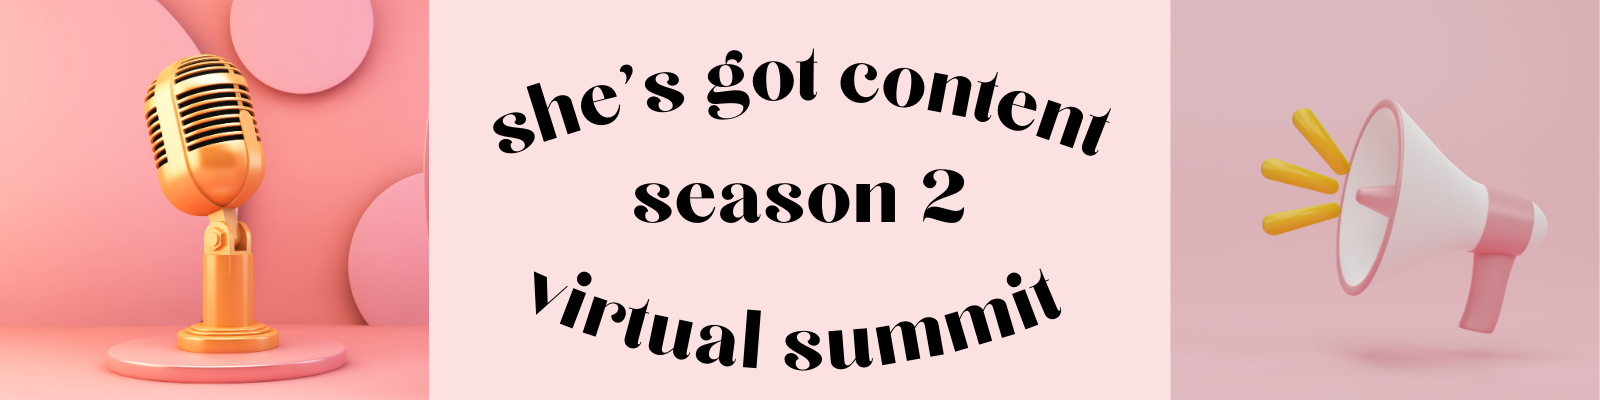 Promotional banner for "she's got content season 2 virtual summit" featuring a microphone and megaphone on a pink background.